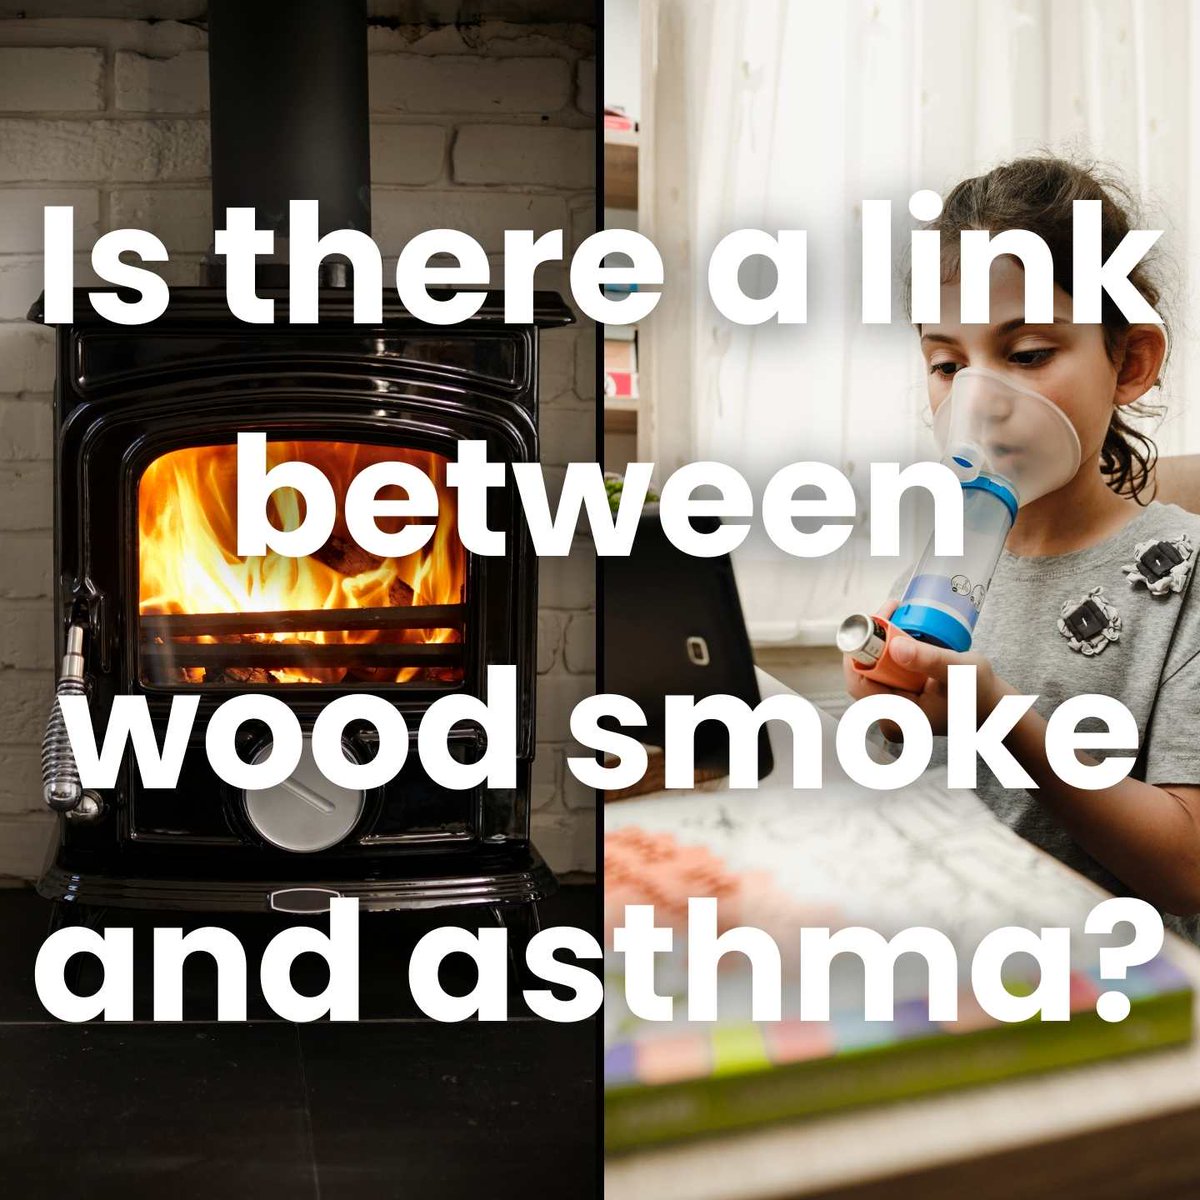 We know that air pollution is both a cause and trigger of asthma, and that wood burning produces air pollution, so can we say that wood burning causes asthma? This World Asthma Day read our article to find out. tinyurl.com/mutyfx76 #airpollution #asthma #worldasthmaday